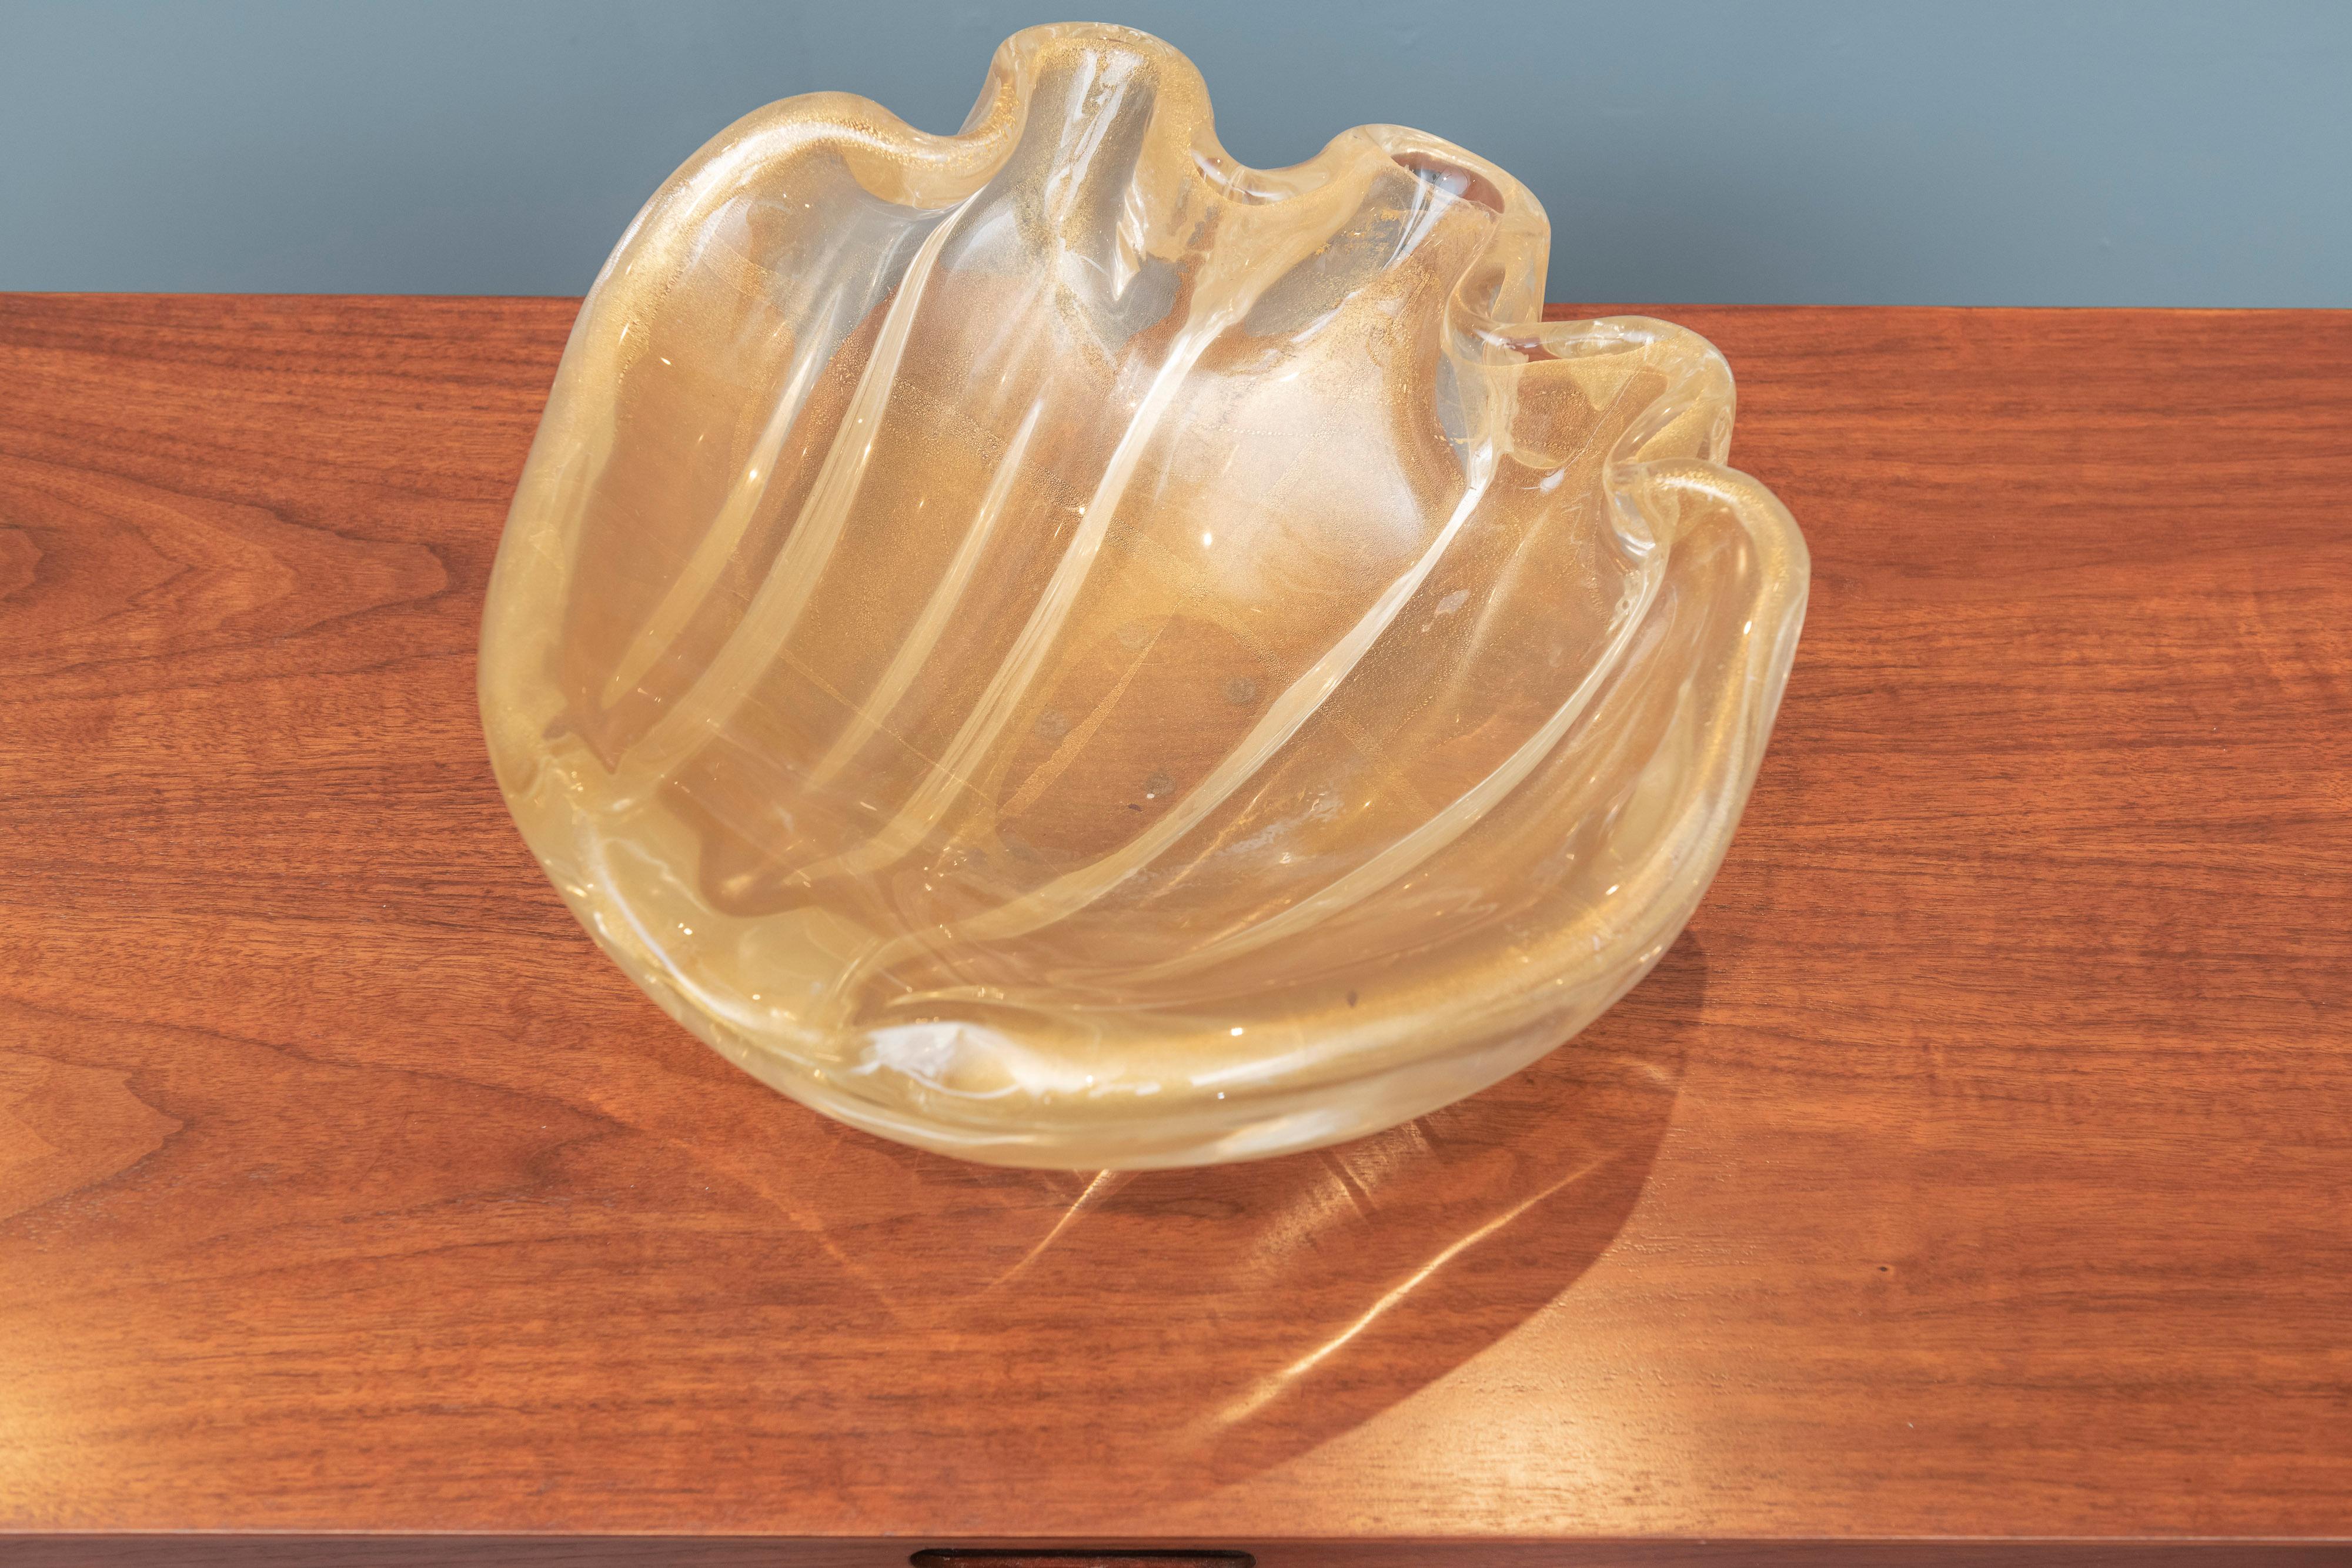 Large Barovier & Toso clam shell form bowl, Murano Italy. Impressive large scale and heavy gold infused glass clam shell.